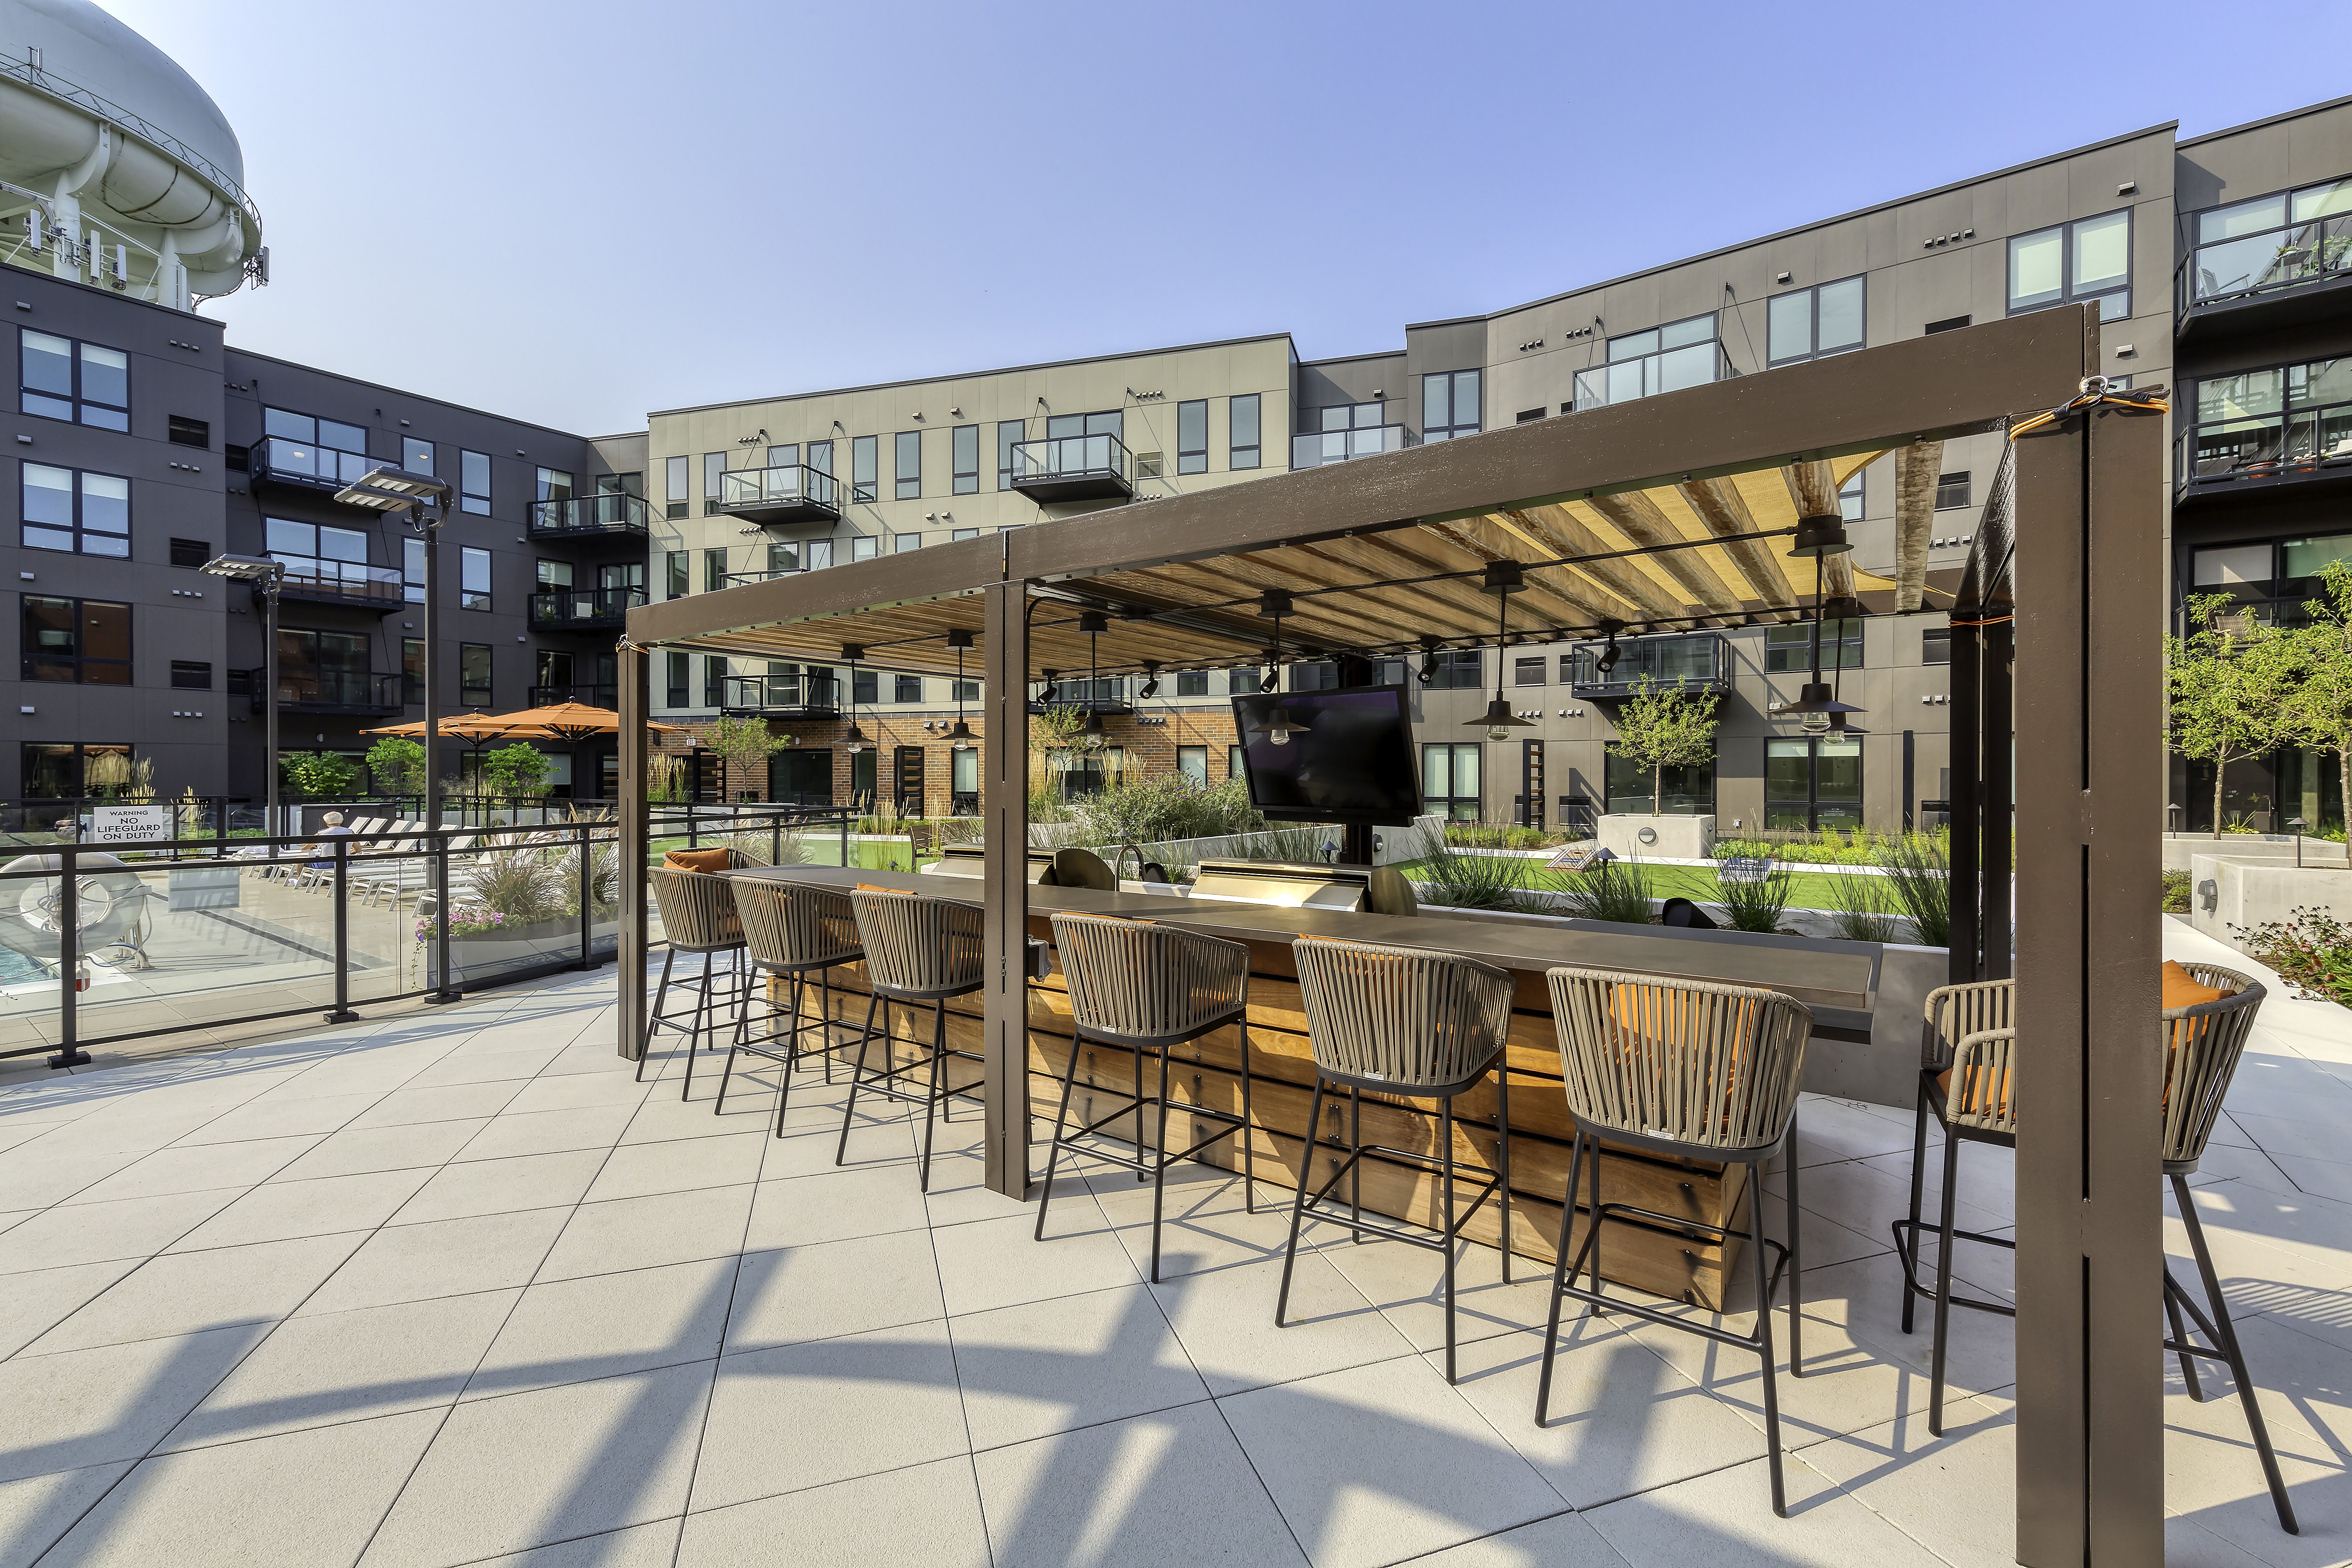 grill and poolside seating area at senior community